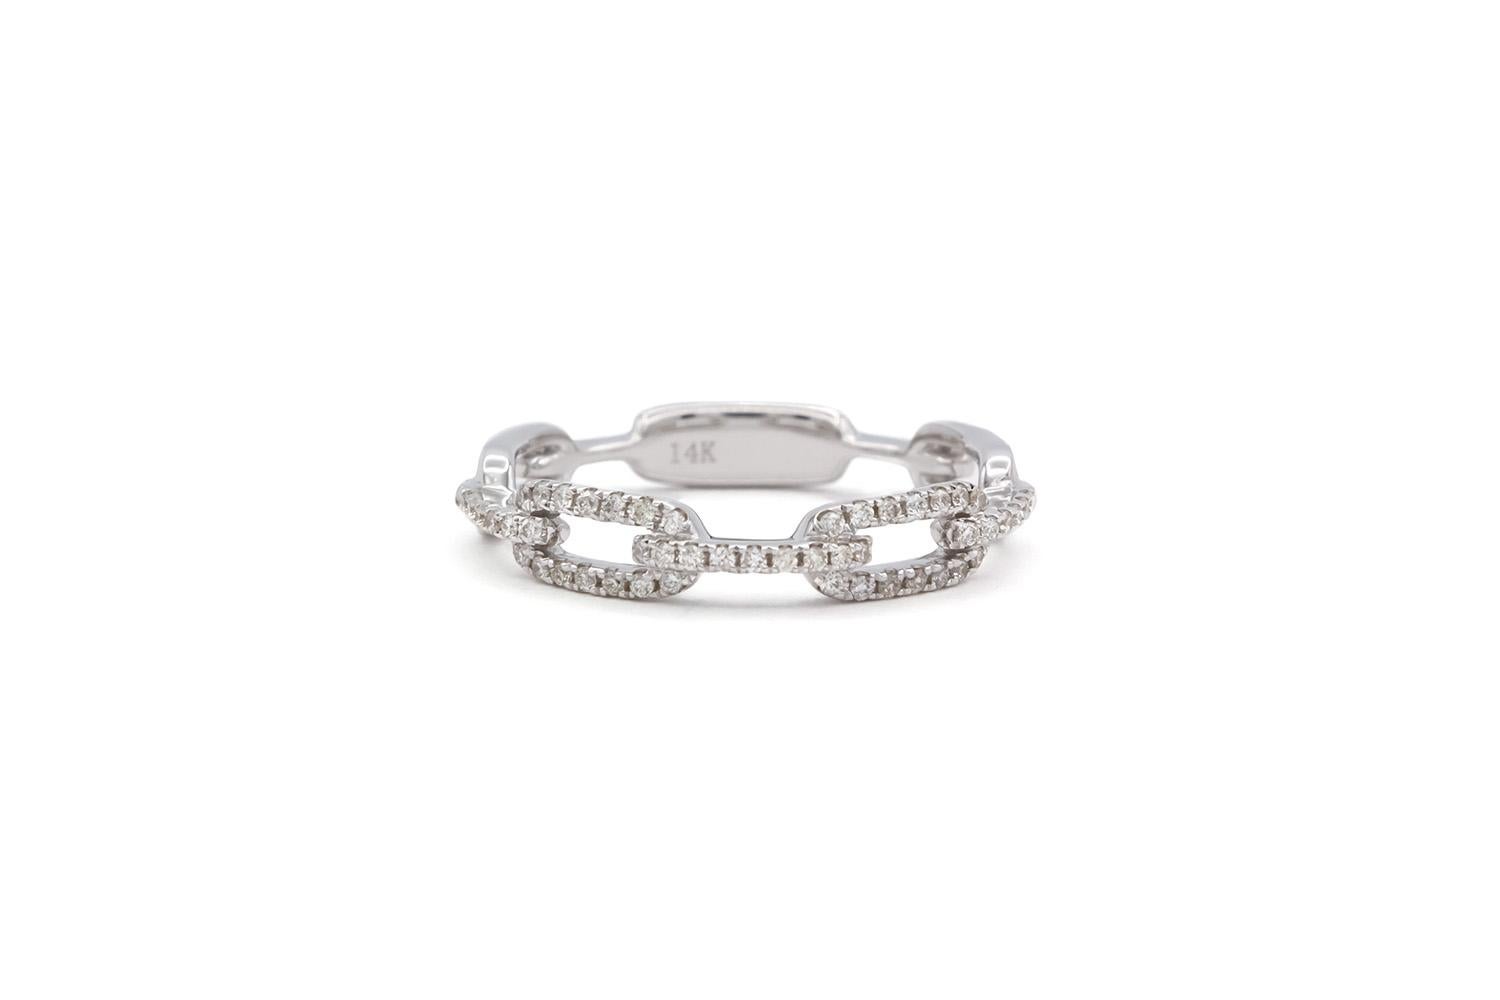 We are pleased to offer this Brand New Solid 14k White Gold & Diamond Ladies Paperclip Stacking Fashion Ring. This beautiful ring features the super popular 